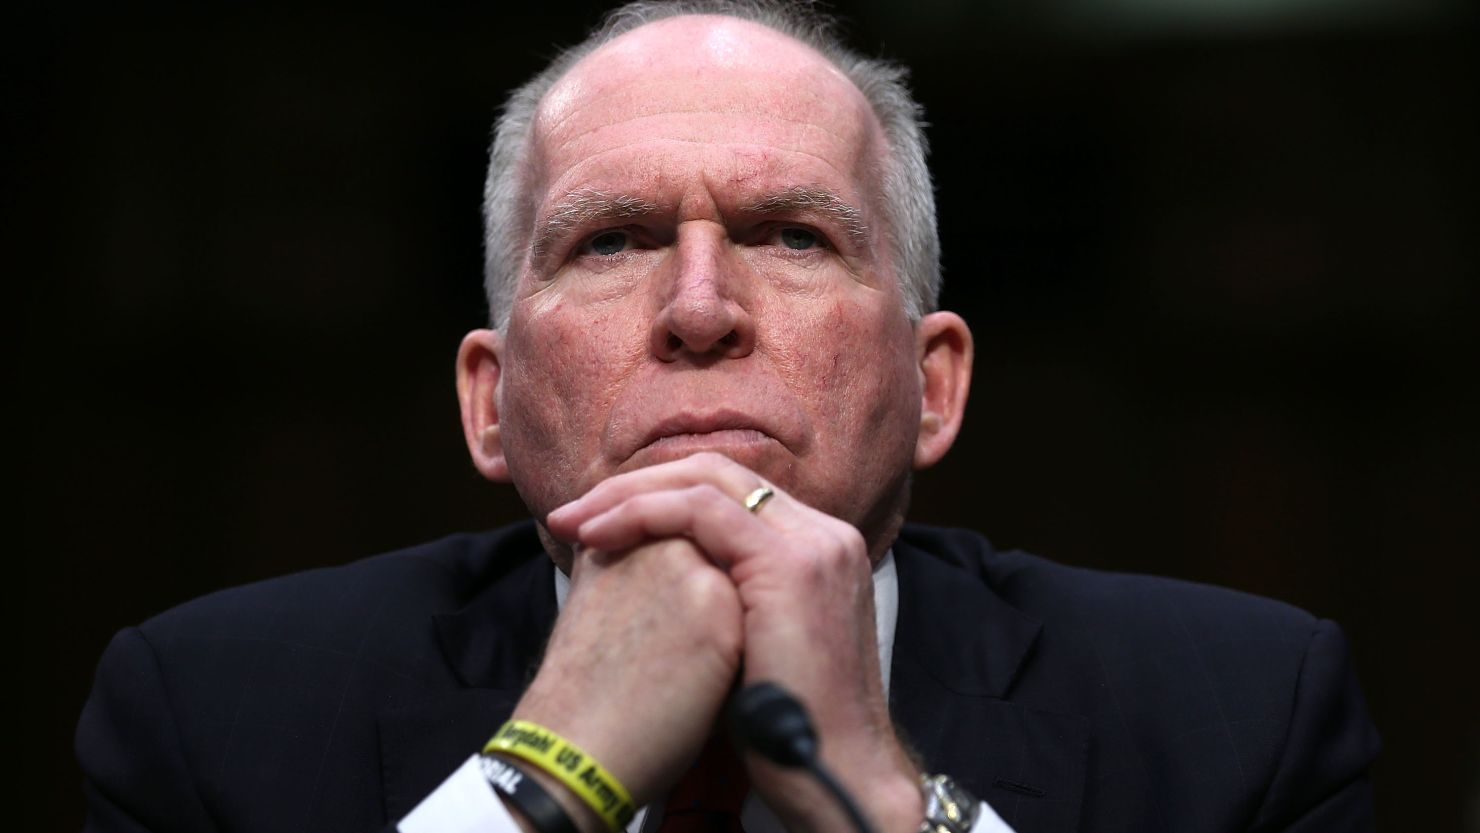 The Senate Intelligence Committee on Tuesday approved the nomination of John Brennan as CIA director.